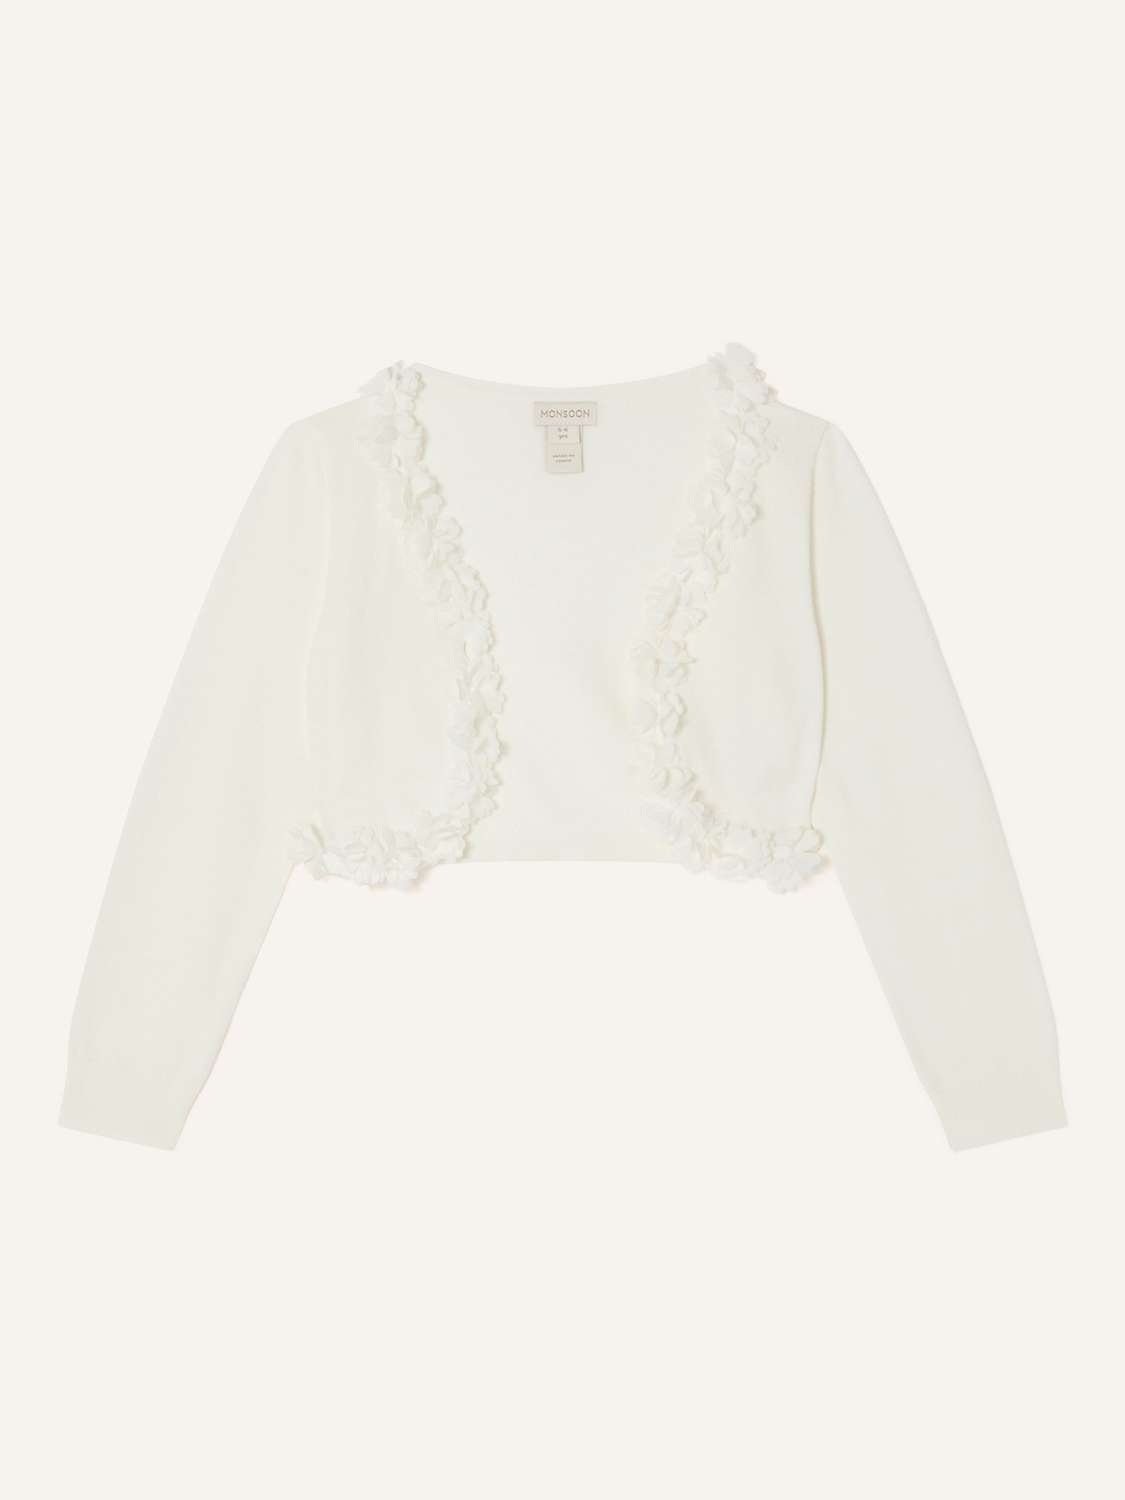 Buy Monsoon Baby Floral 3D Cardigan, Ivory Online at johnlewis.com